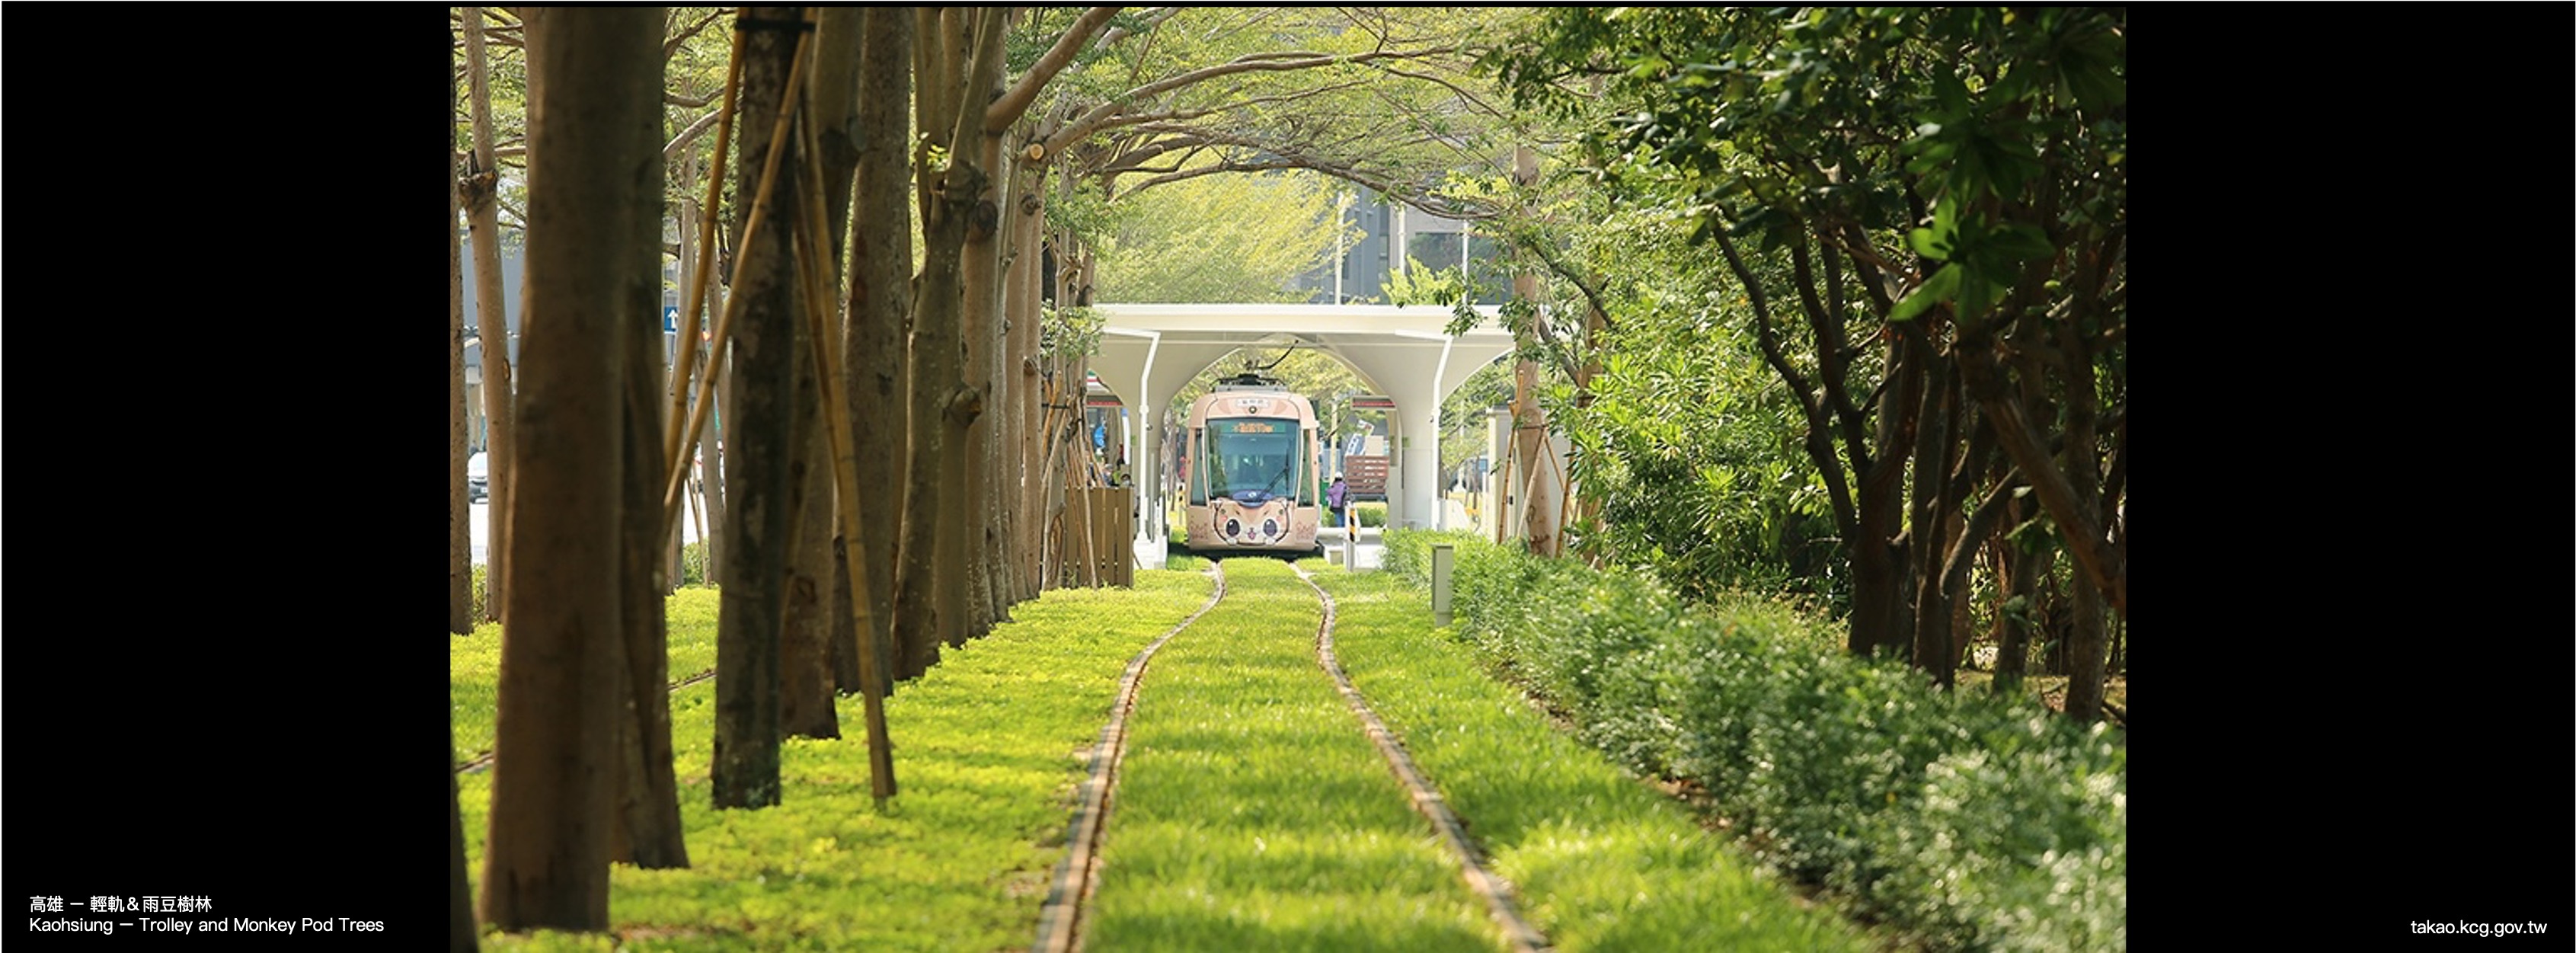 Kaohsiung trolley and monkey pod trees 